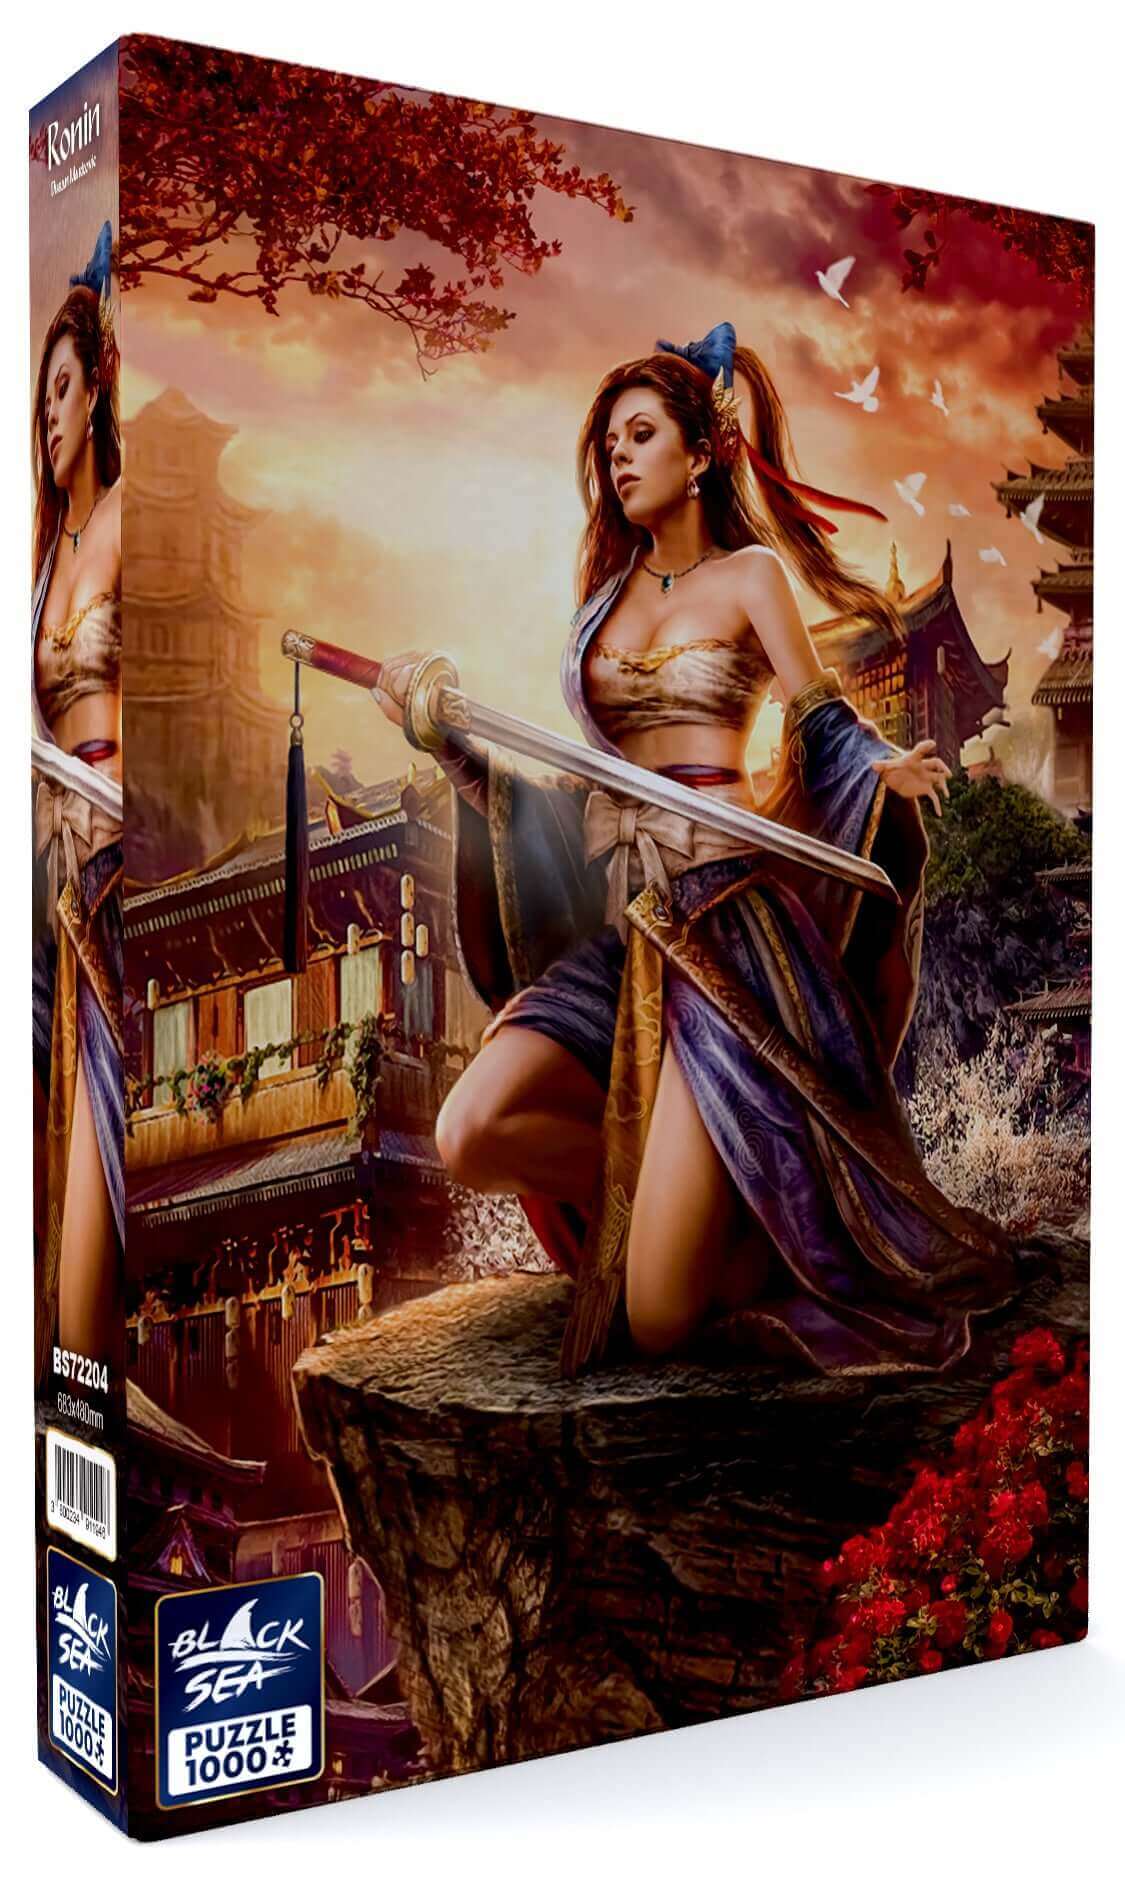 Puzzle Black Sea Premium 1000 pieces - Ronin, Mysterious and unpredictable, the woman warrior combines the beauty of the dance and the inevitability of death. Her fate has forever sealed her and her sword, that is much more than a weapon - it is her faith